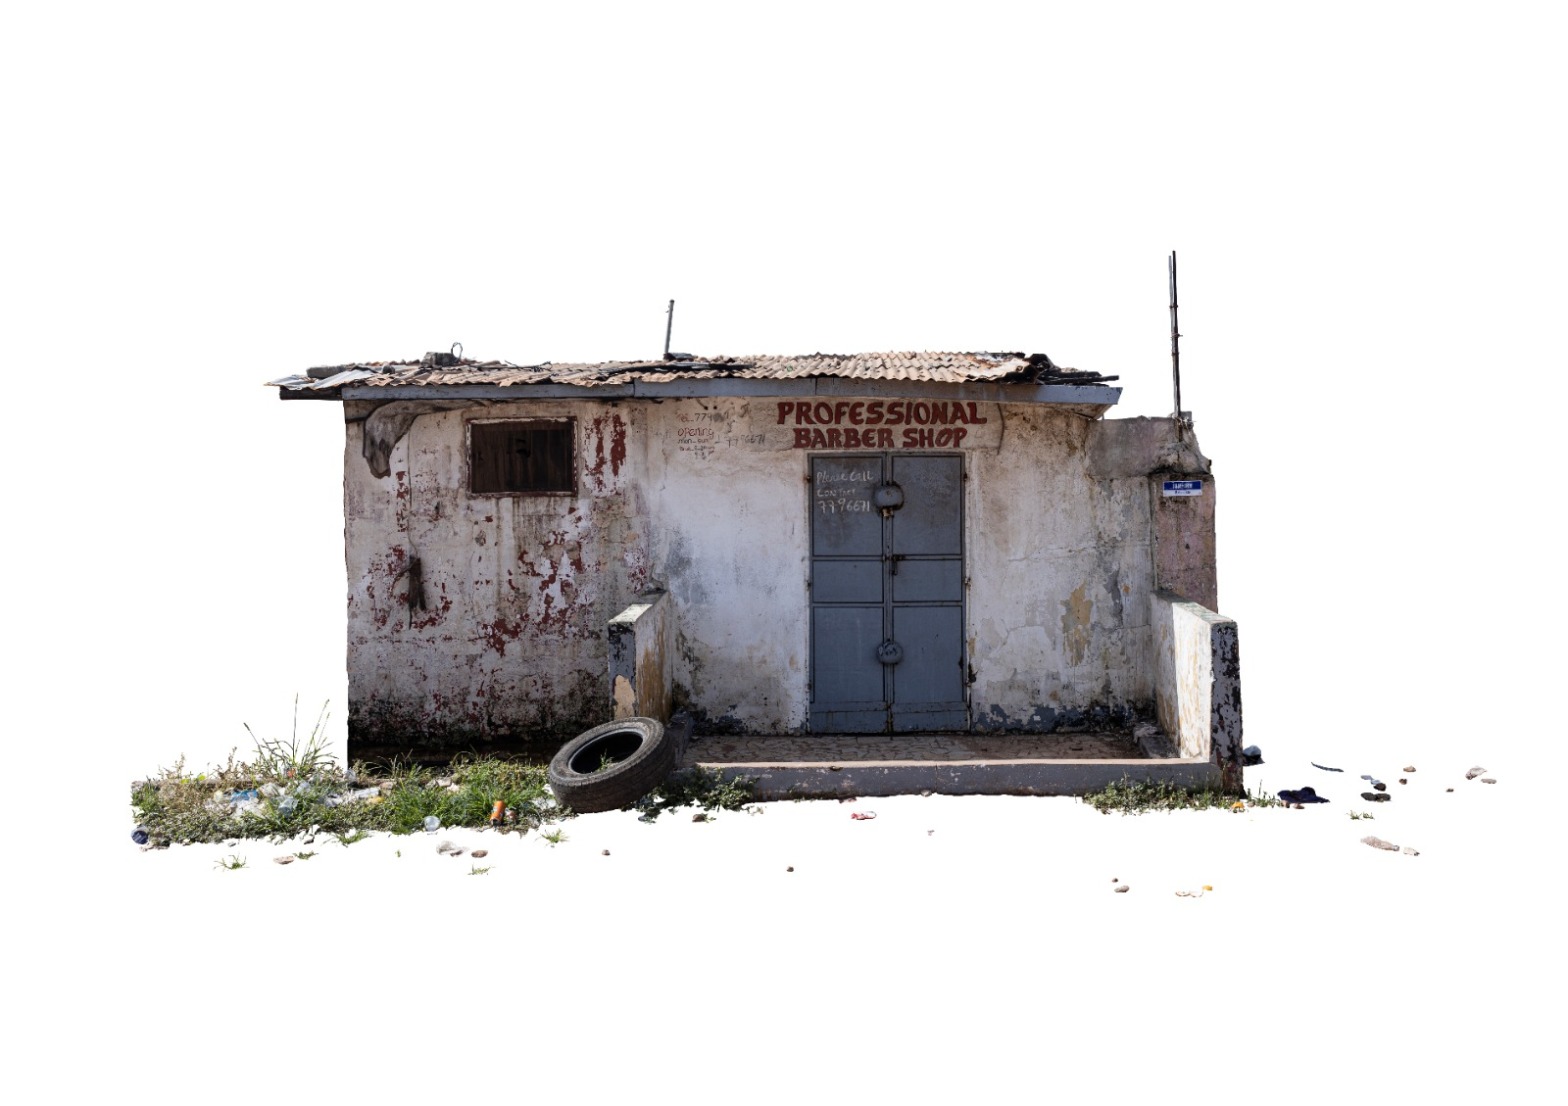 Photography Prints - African Doors by Helen Jones-Florio - storefront of a closed barber shop in The Gambia, West Africa